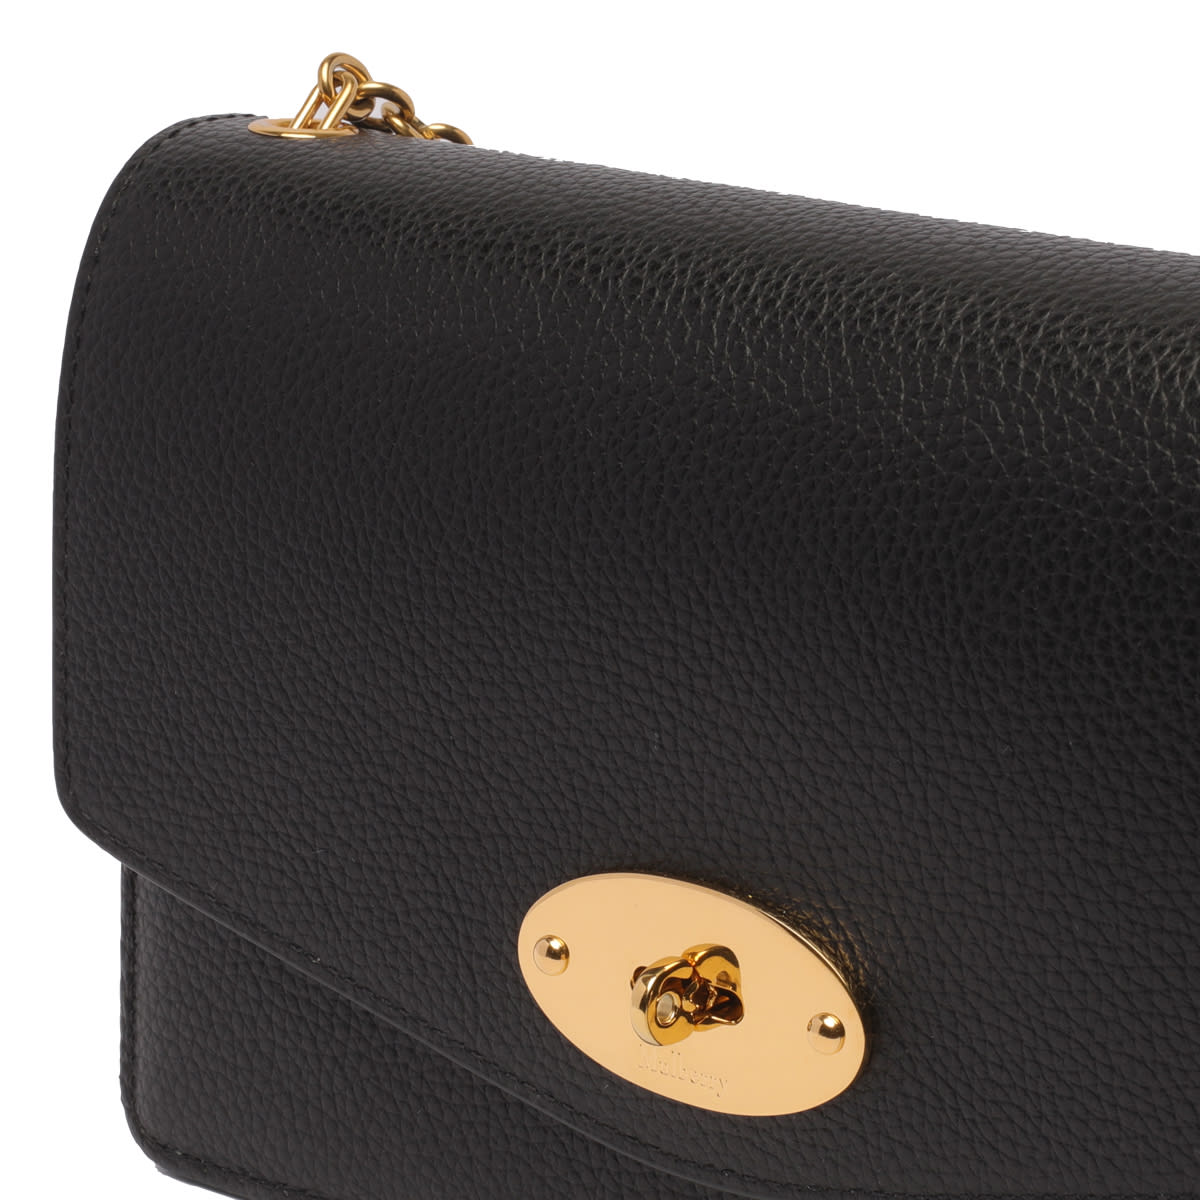 Shop Mulberry Darley Classic Small Shoulder Bag In Black